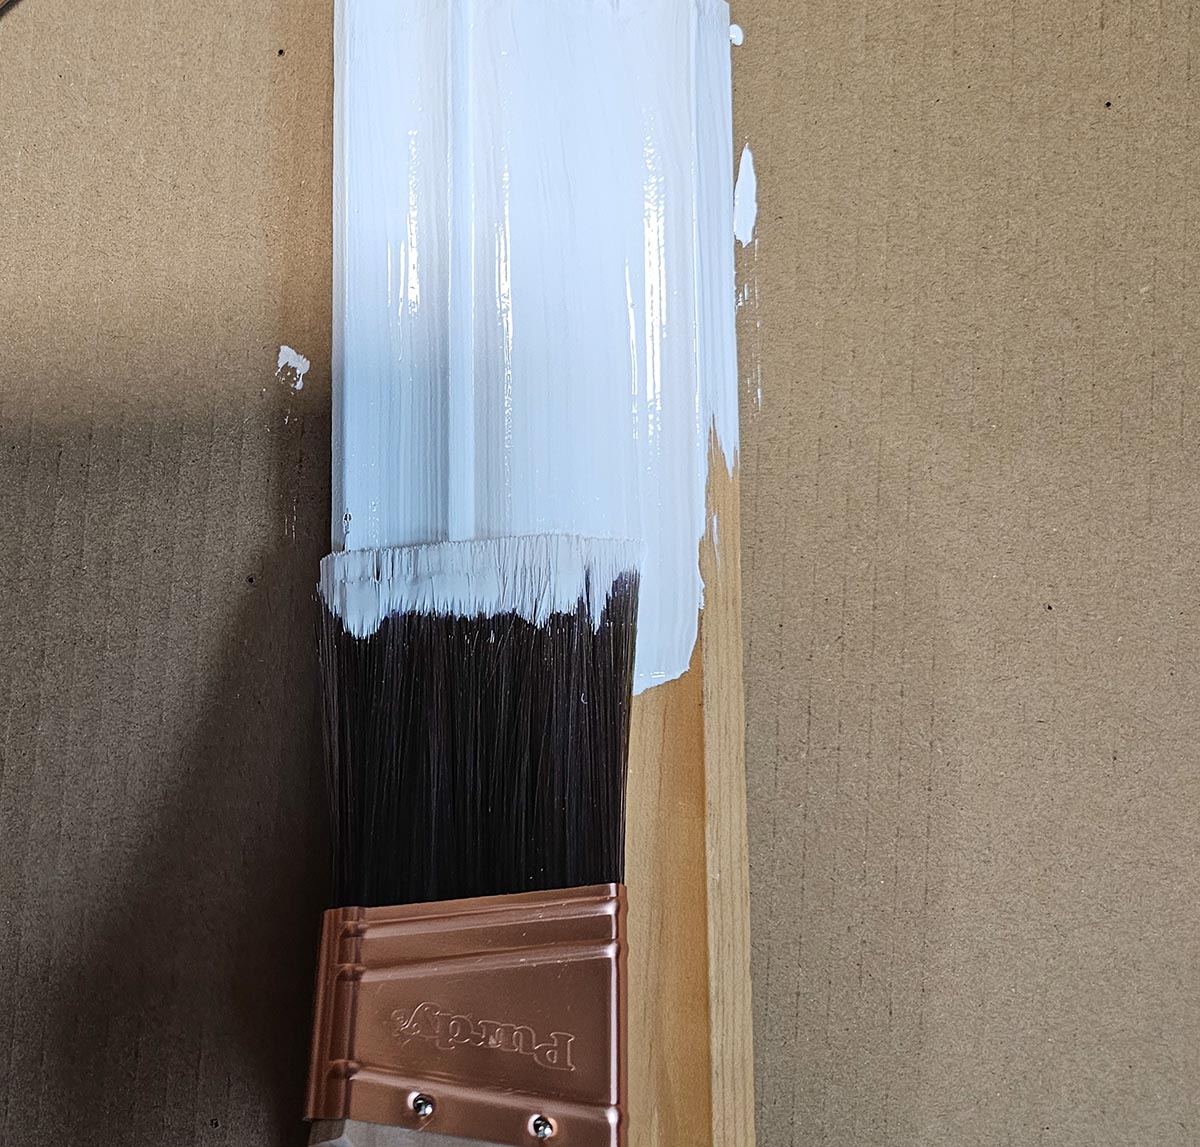 The Purdy 2-inch XL Glide Paint Brush in use for painting a piece of wood trim white.